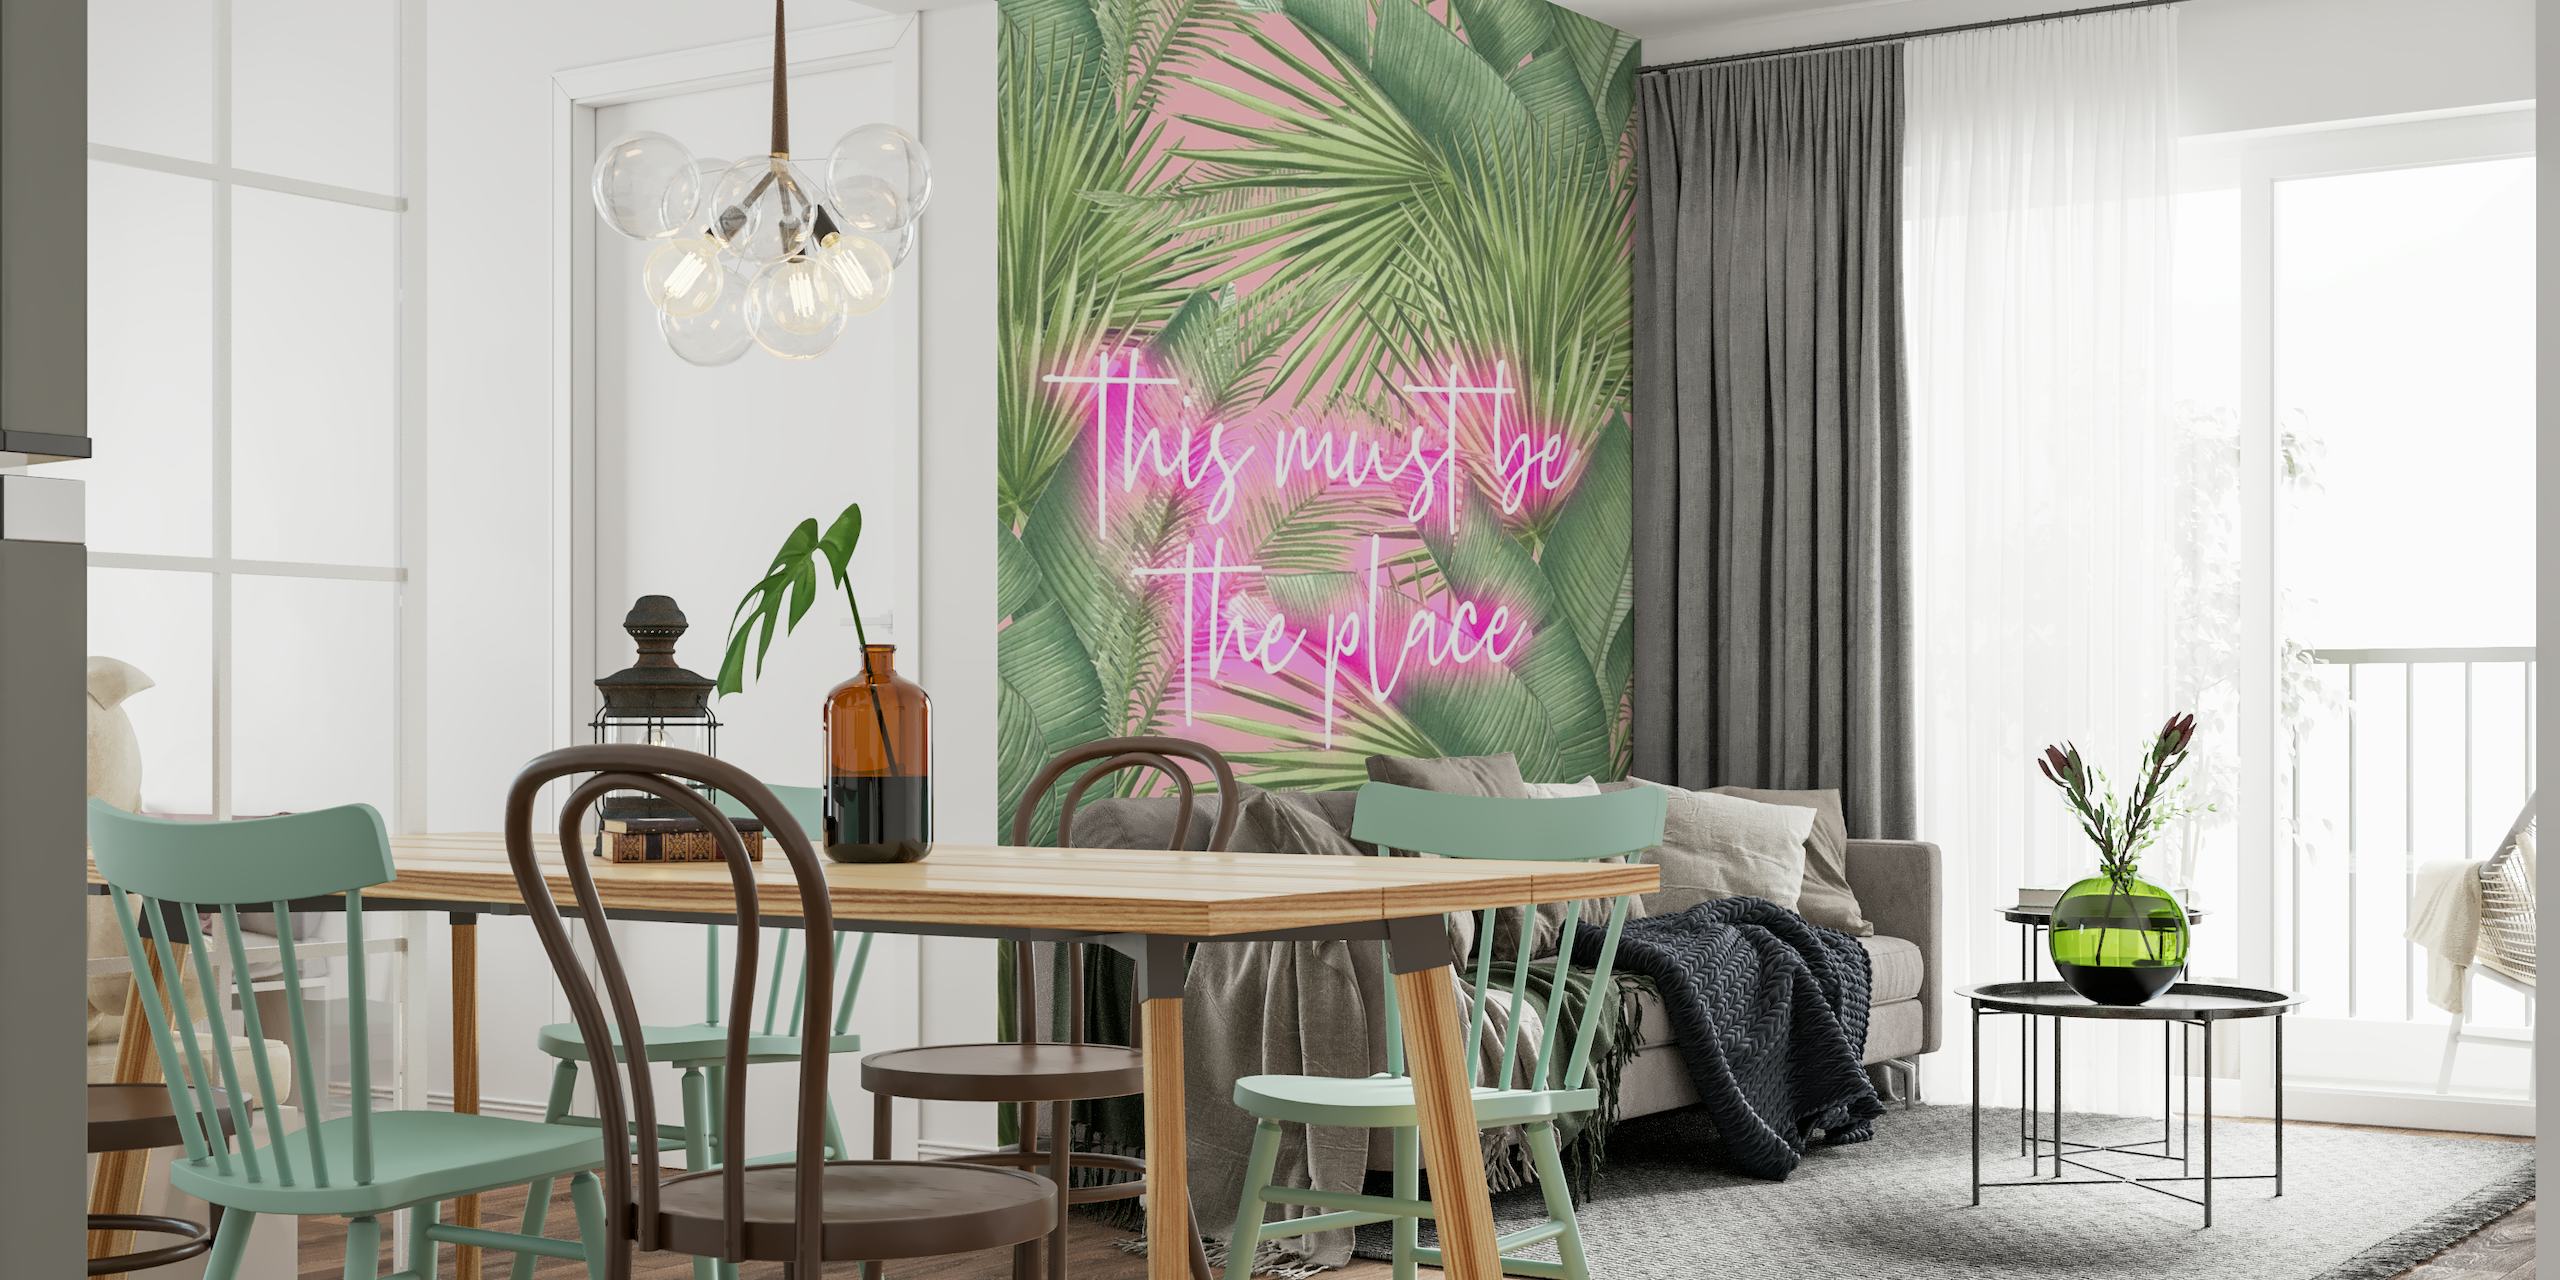 Wall mural with neon sign saying 'This must be the place' amidst tropical green palm leaves.